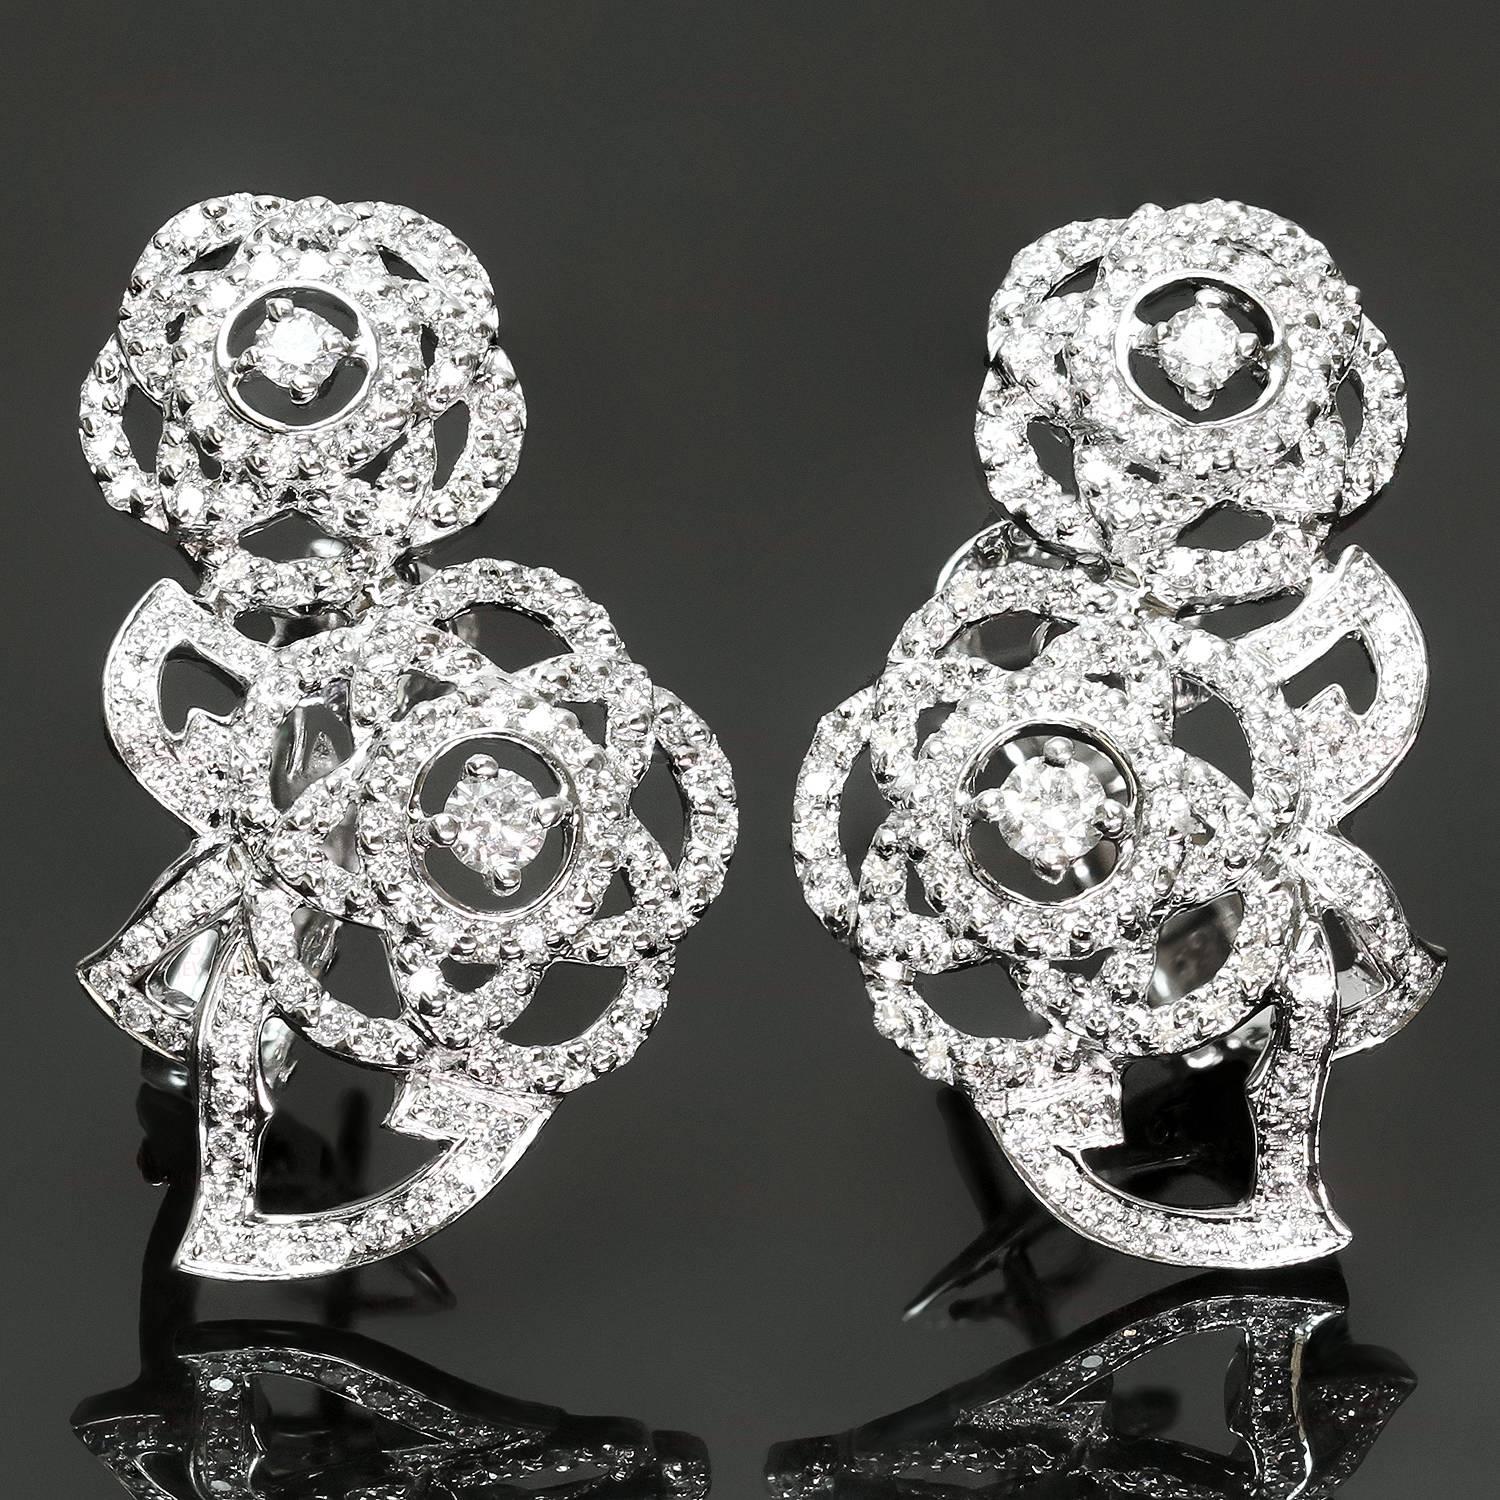 These magnificent Chanel earrings from the iconic Chamelia collection feature a delicate double flower design crafted in 18k white gold and set with brilliant-cut round diamonds. Made in France circa 2000s. Measurements: 0.70